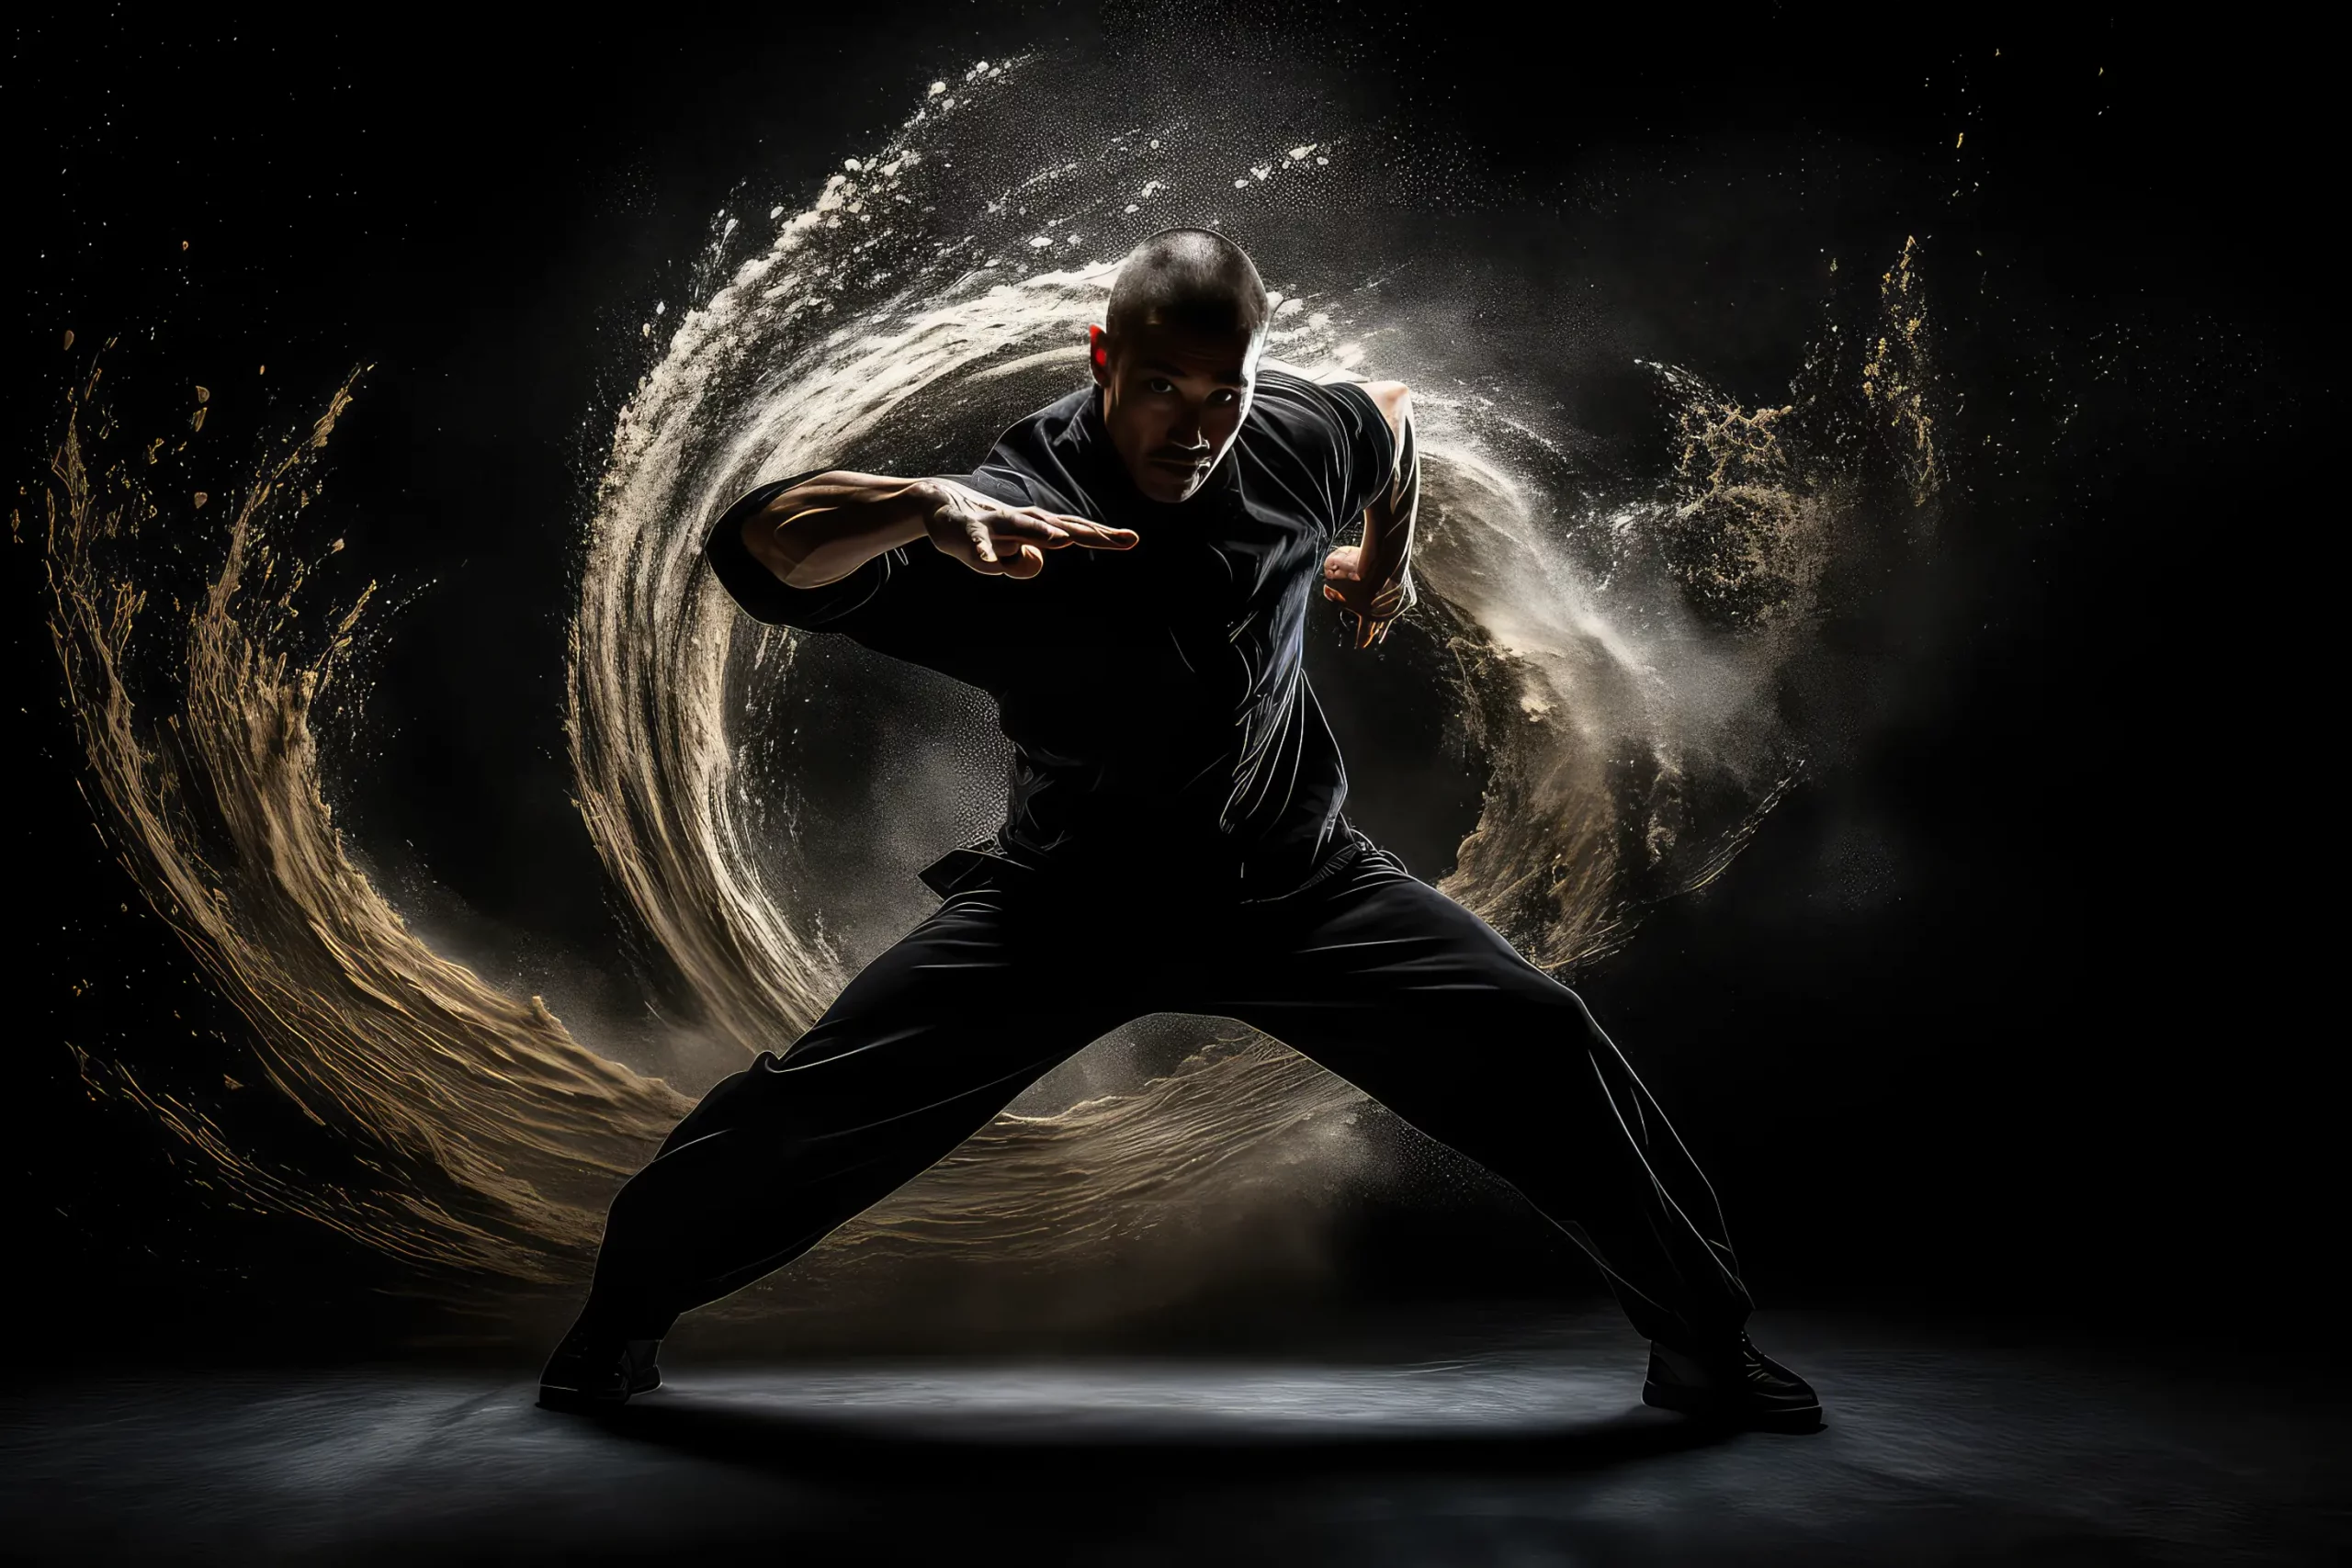 Jeet Kune Do Master showing the fluidity of motion in stylized image